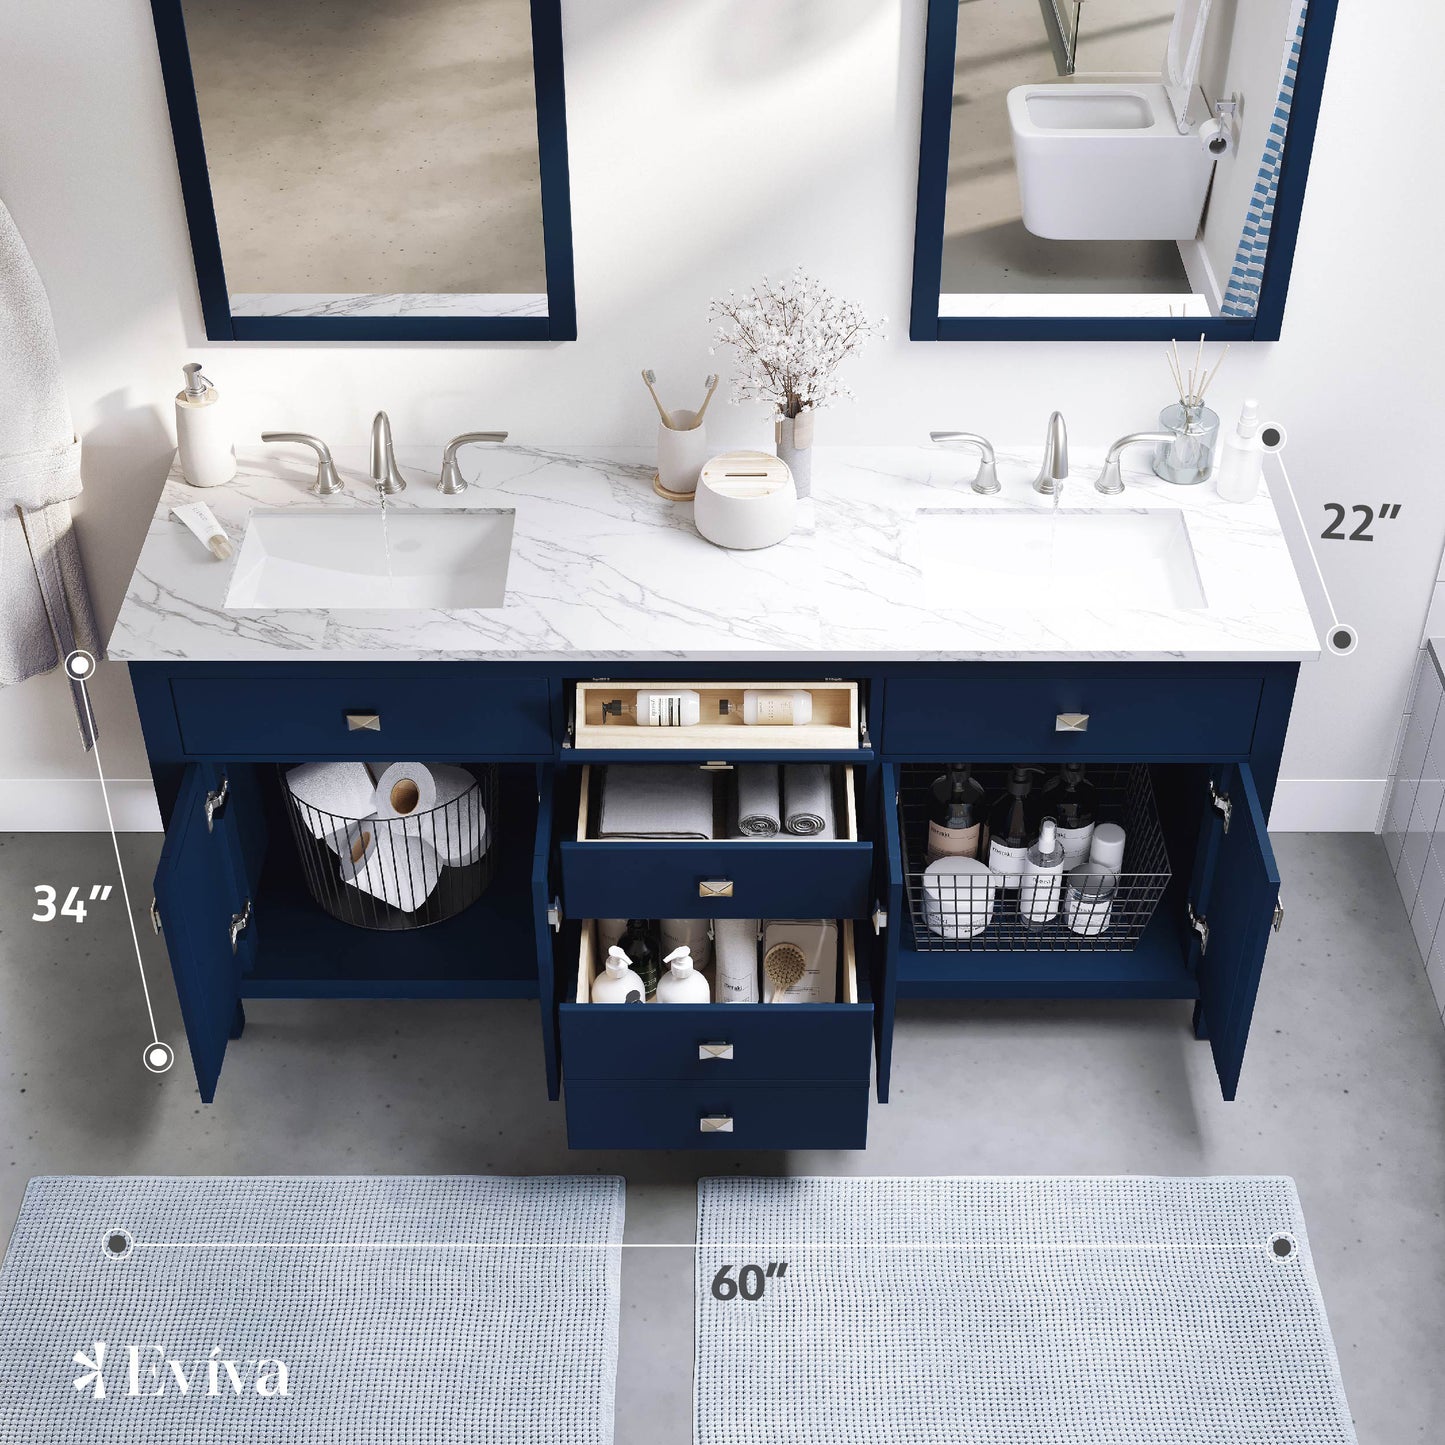 Totti Artemis 60 inch Blue Transitional Double Sink Bathroom Vanity with White Carrara Style Man-Made Stone Countertop and Under mount Porcelain Sinks